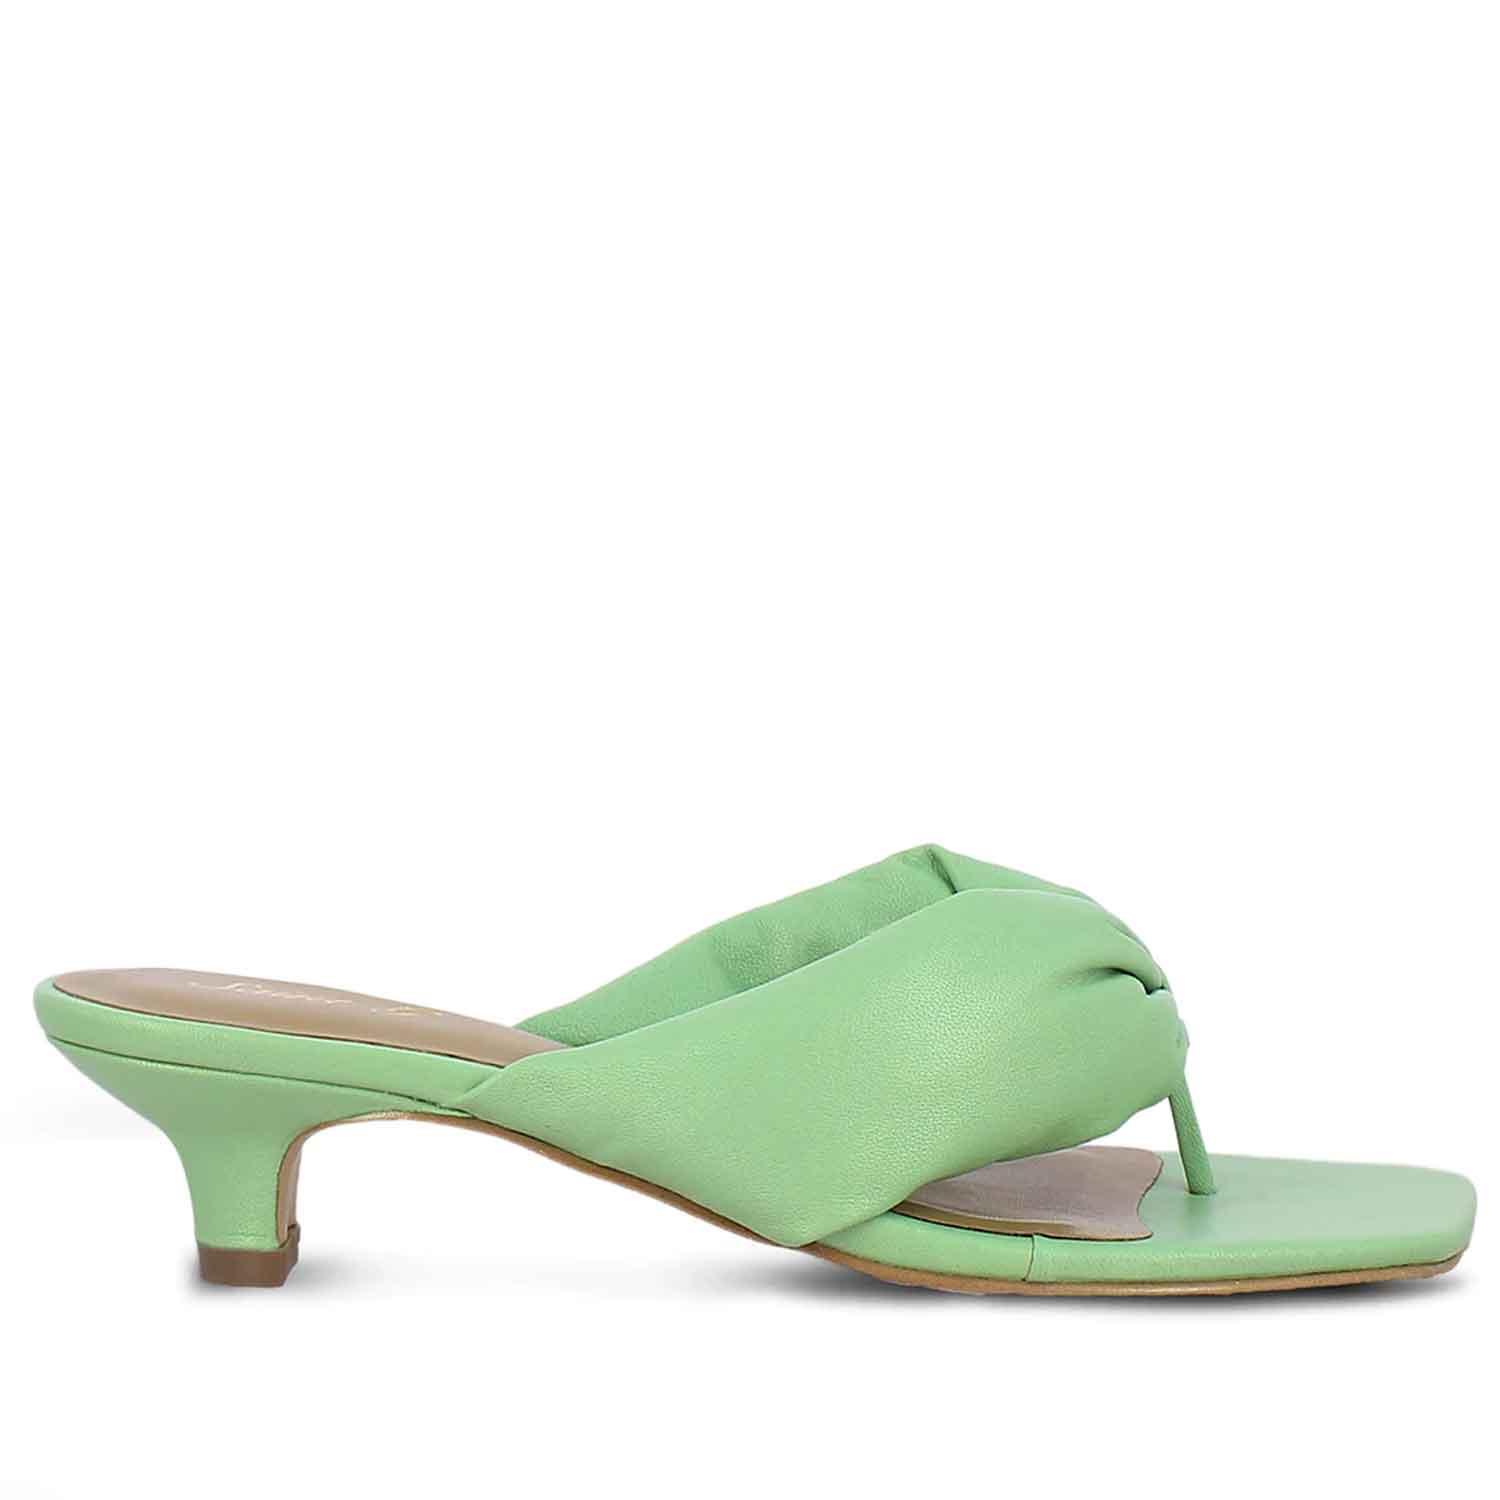 Buy Green Shoes For Women at Lowest Prices Online In India | Tata CLiQ